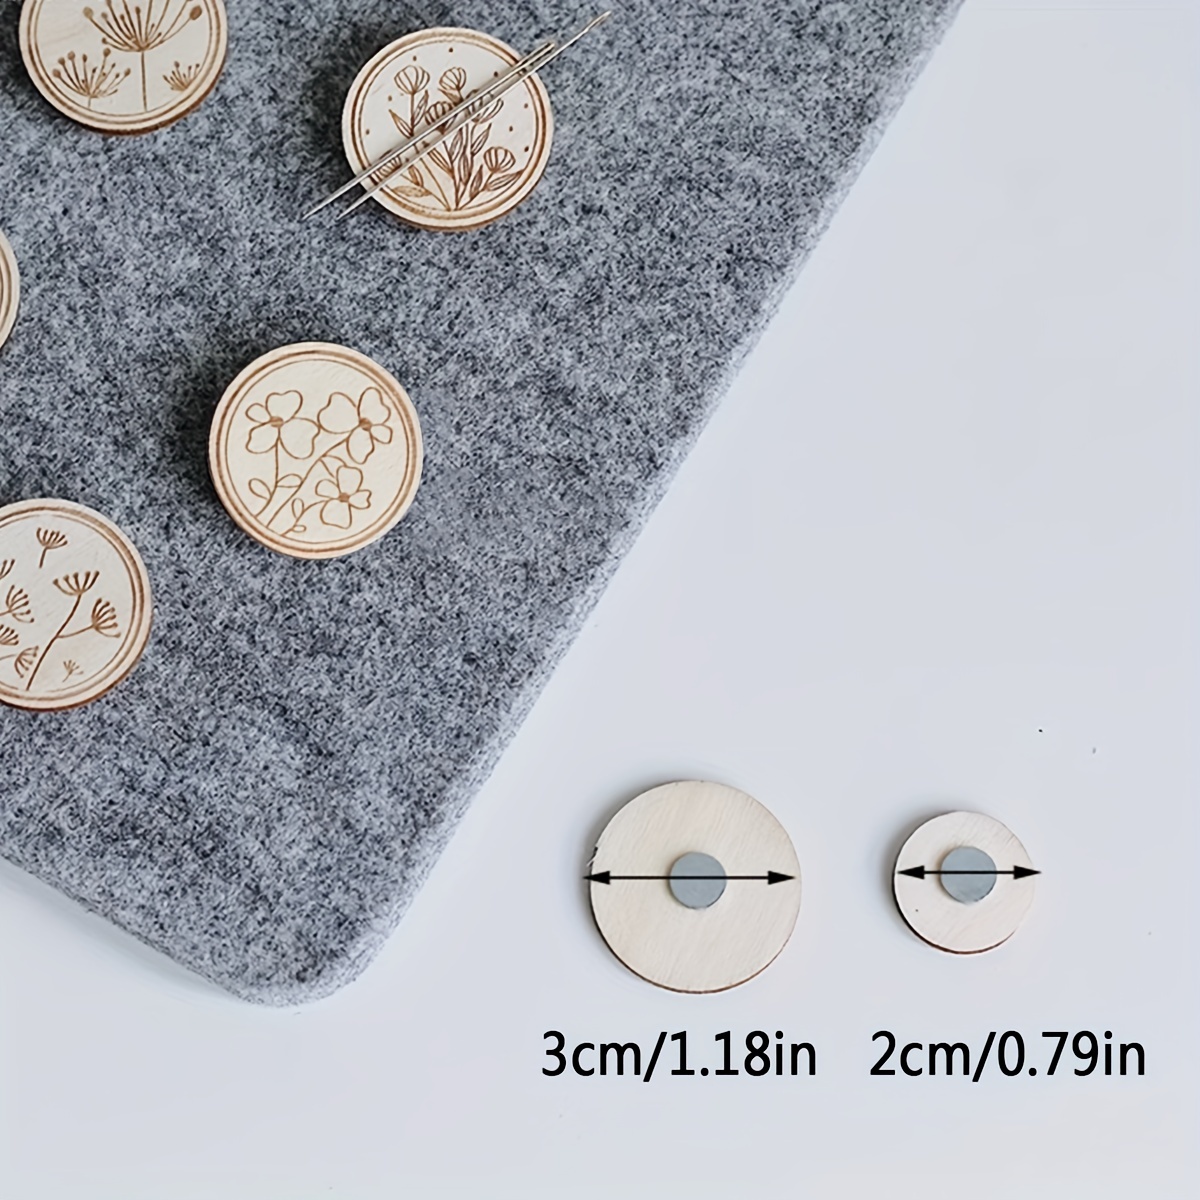  Suction Box Magnetic Needle Case Magnetic Pin Holder